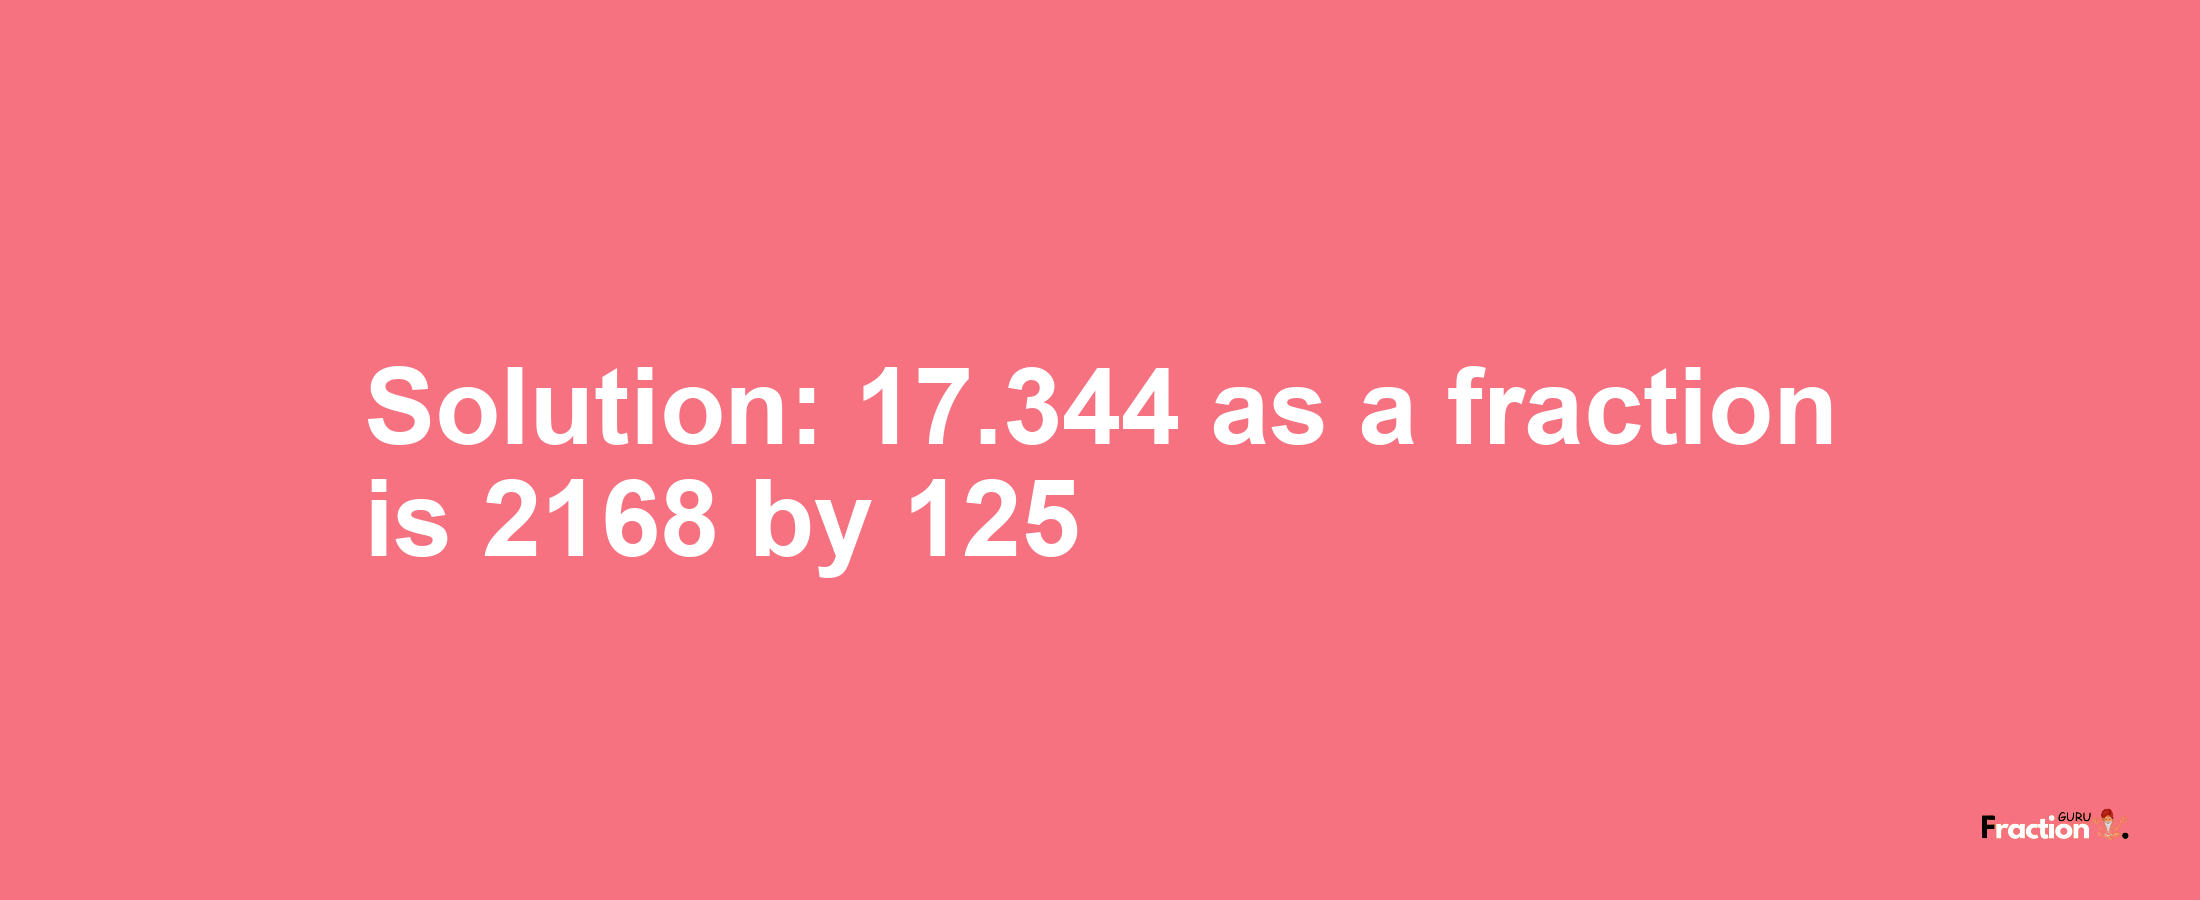 Solution:17.344 as a fraction is 2168/125